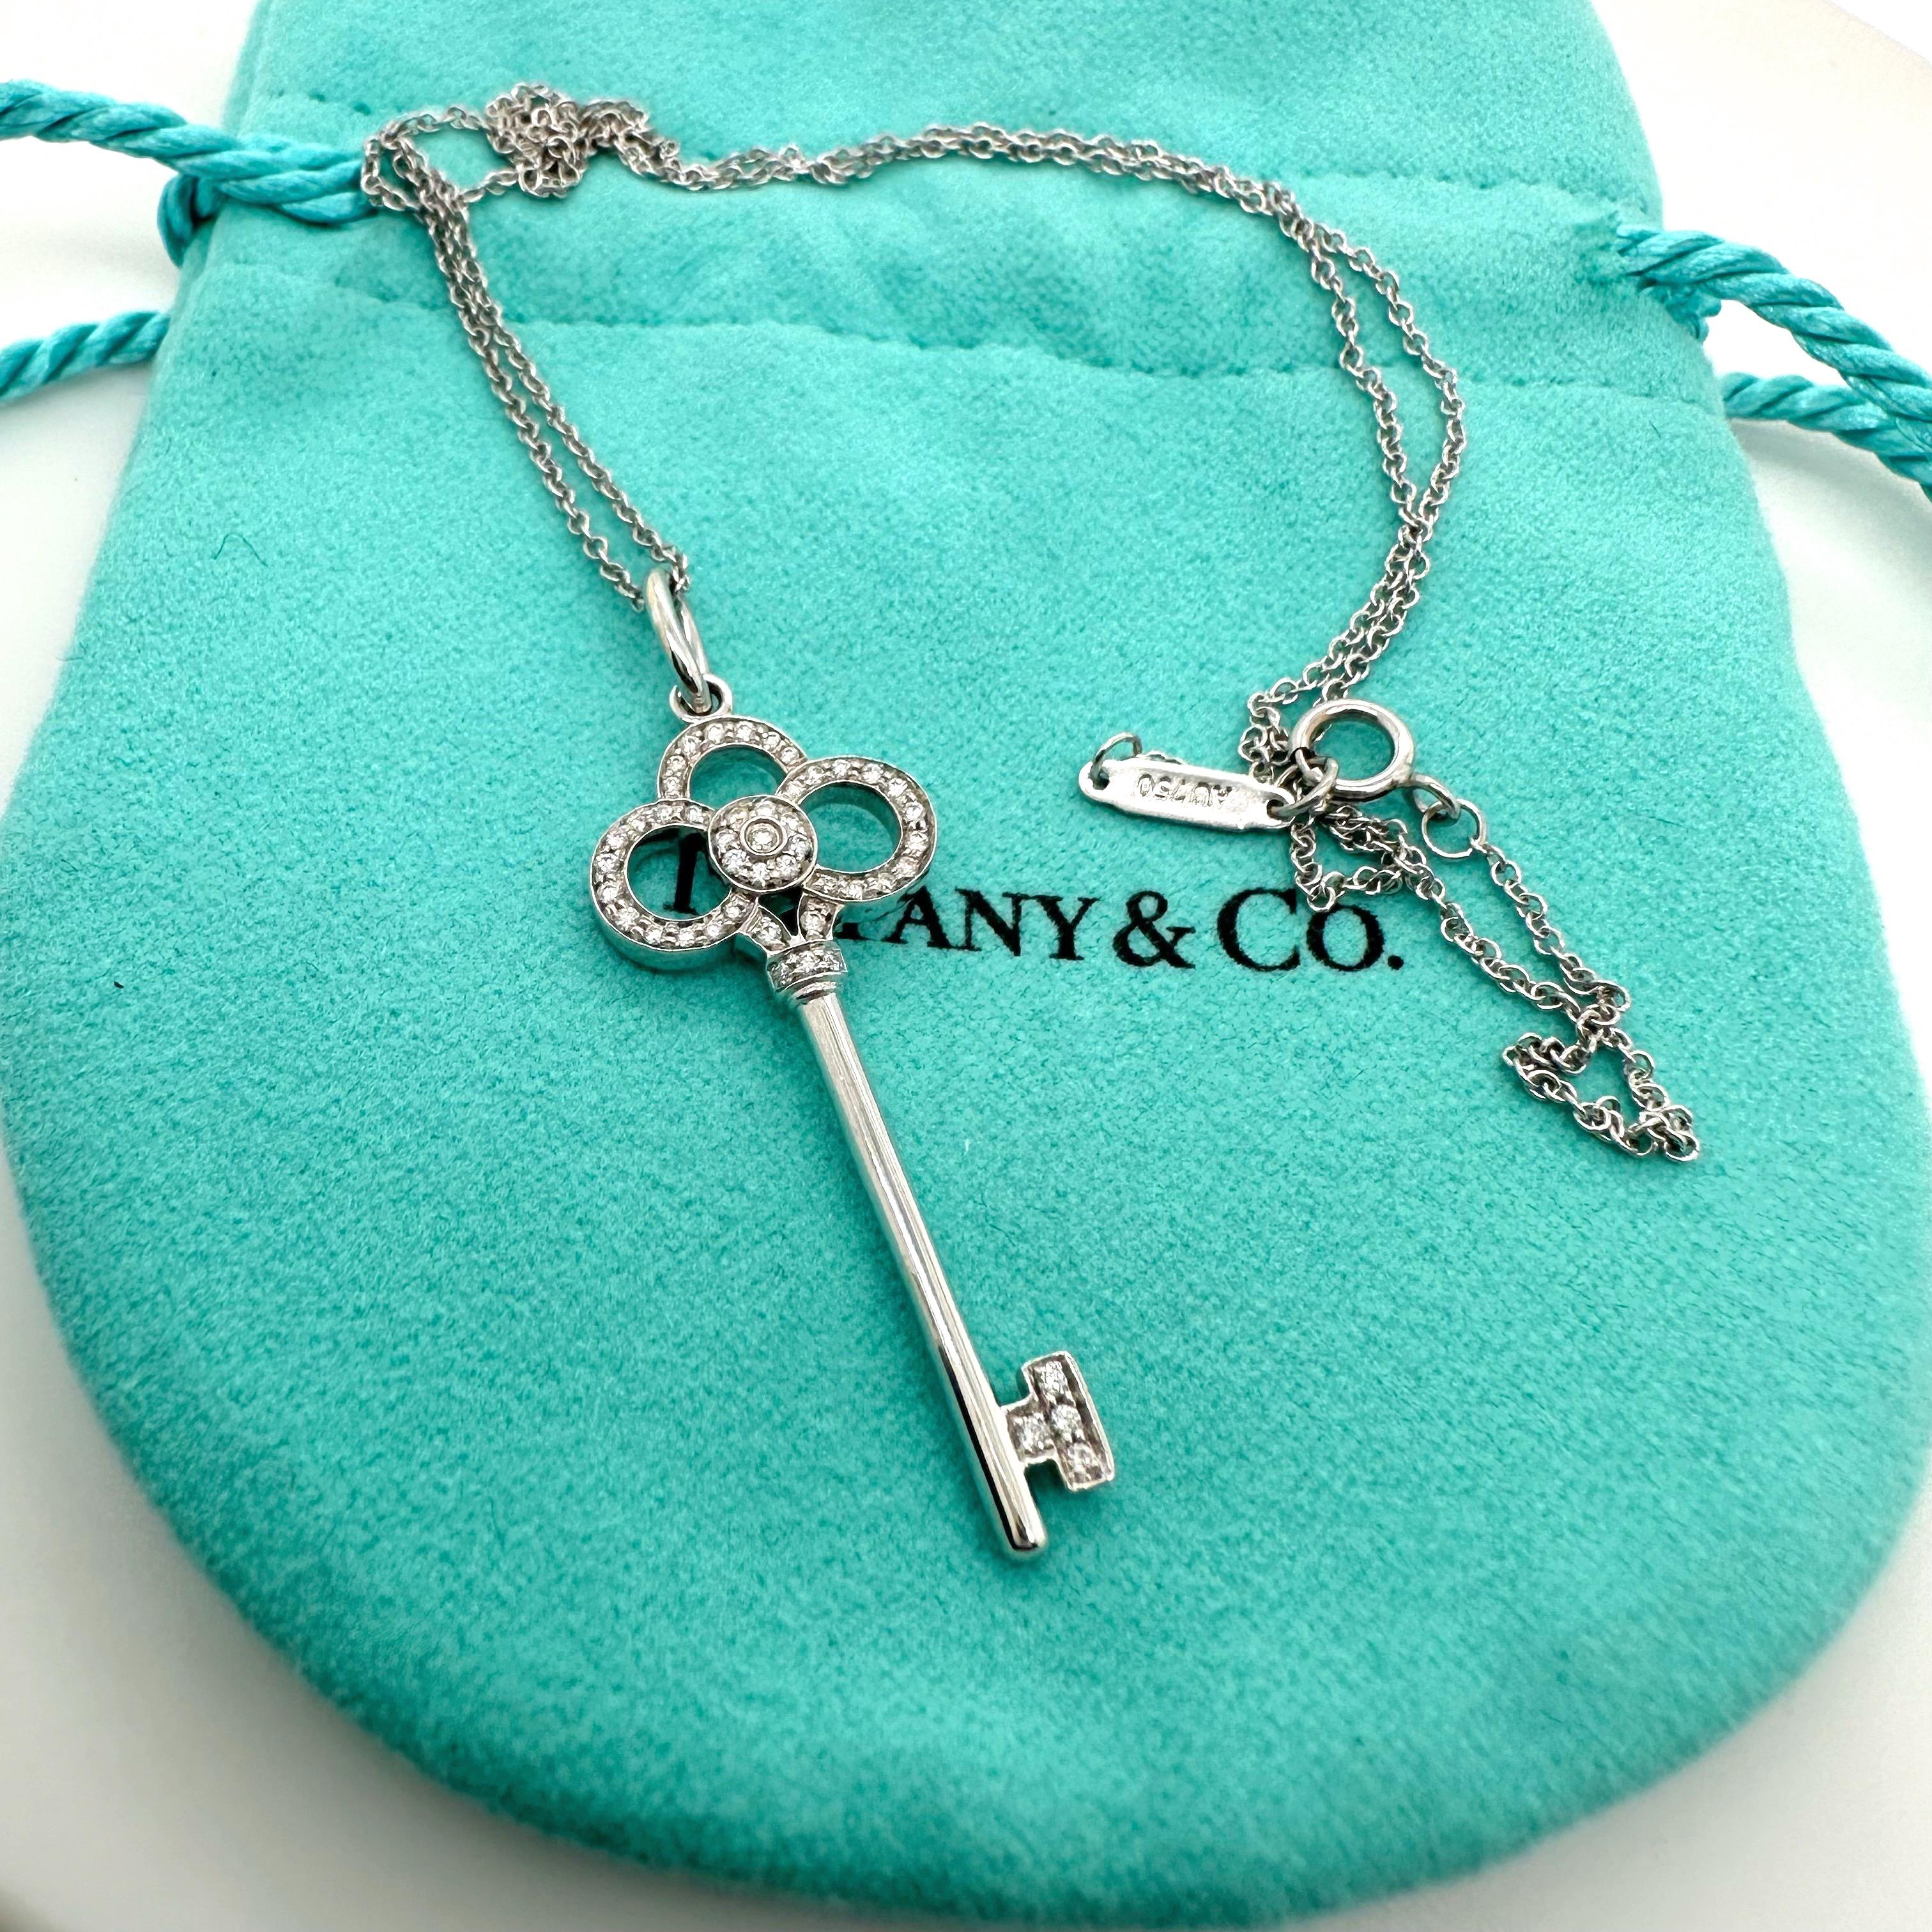 Tiffany & Co. Crown Key Diamond Pendant Necklace 18kt White Gold In Excellent Condition For Sale In San Diego, CA